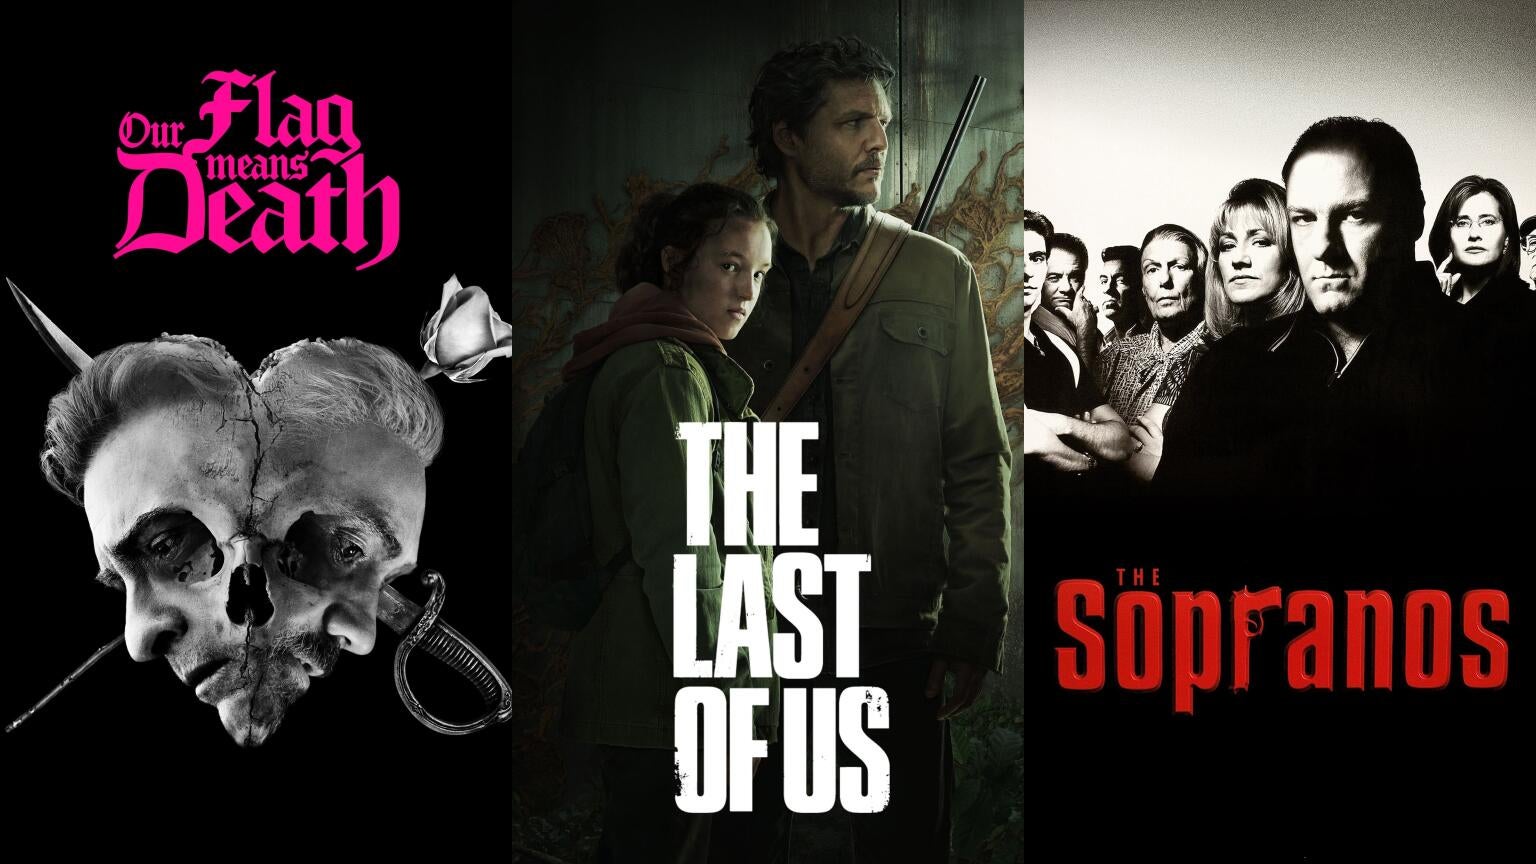 Posters for "Our Flag Means Death," "The Last of Us," and "The Sopranos"